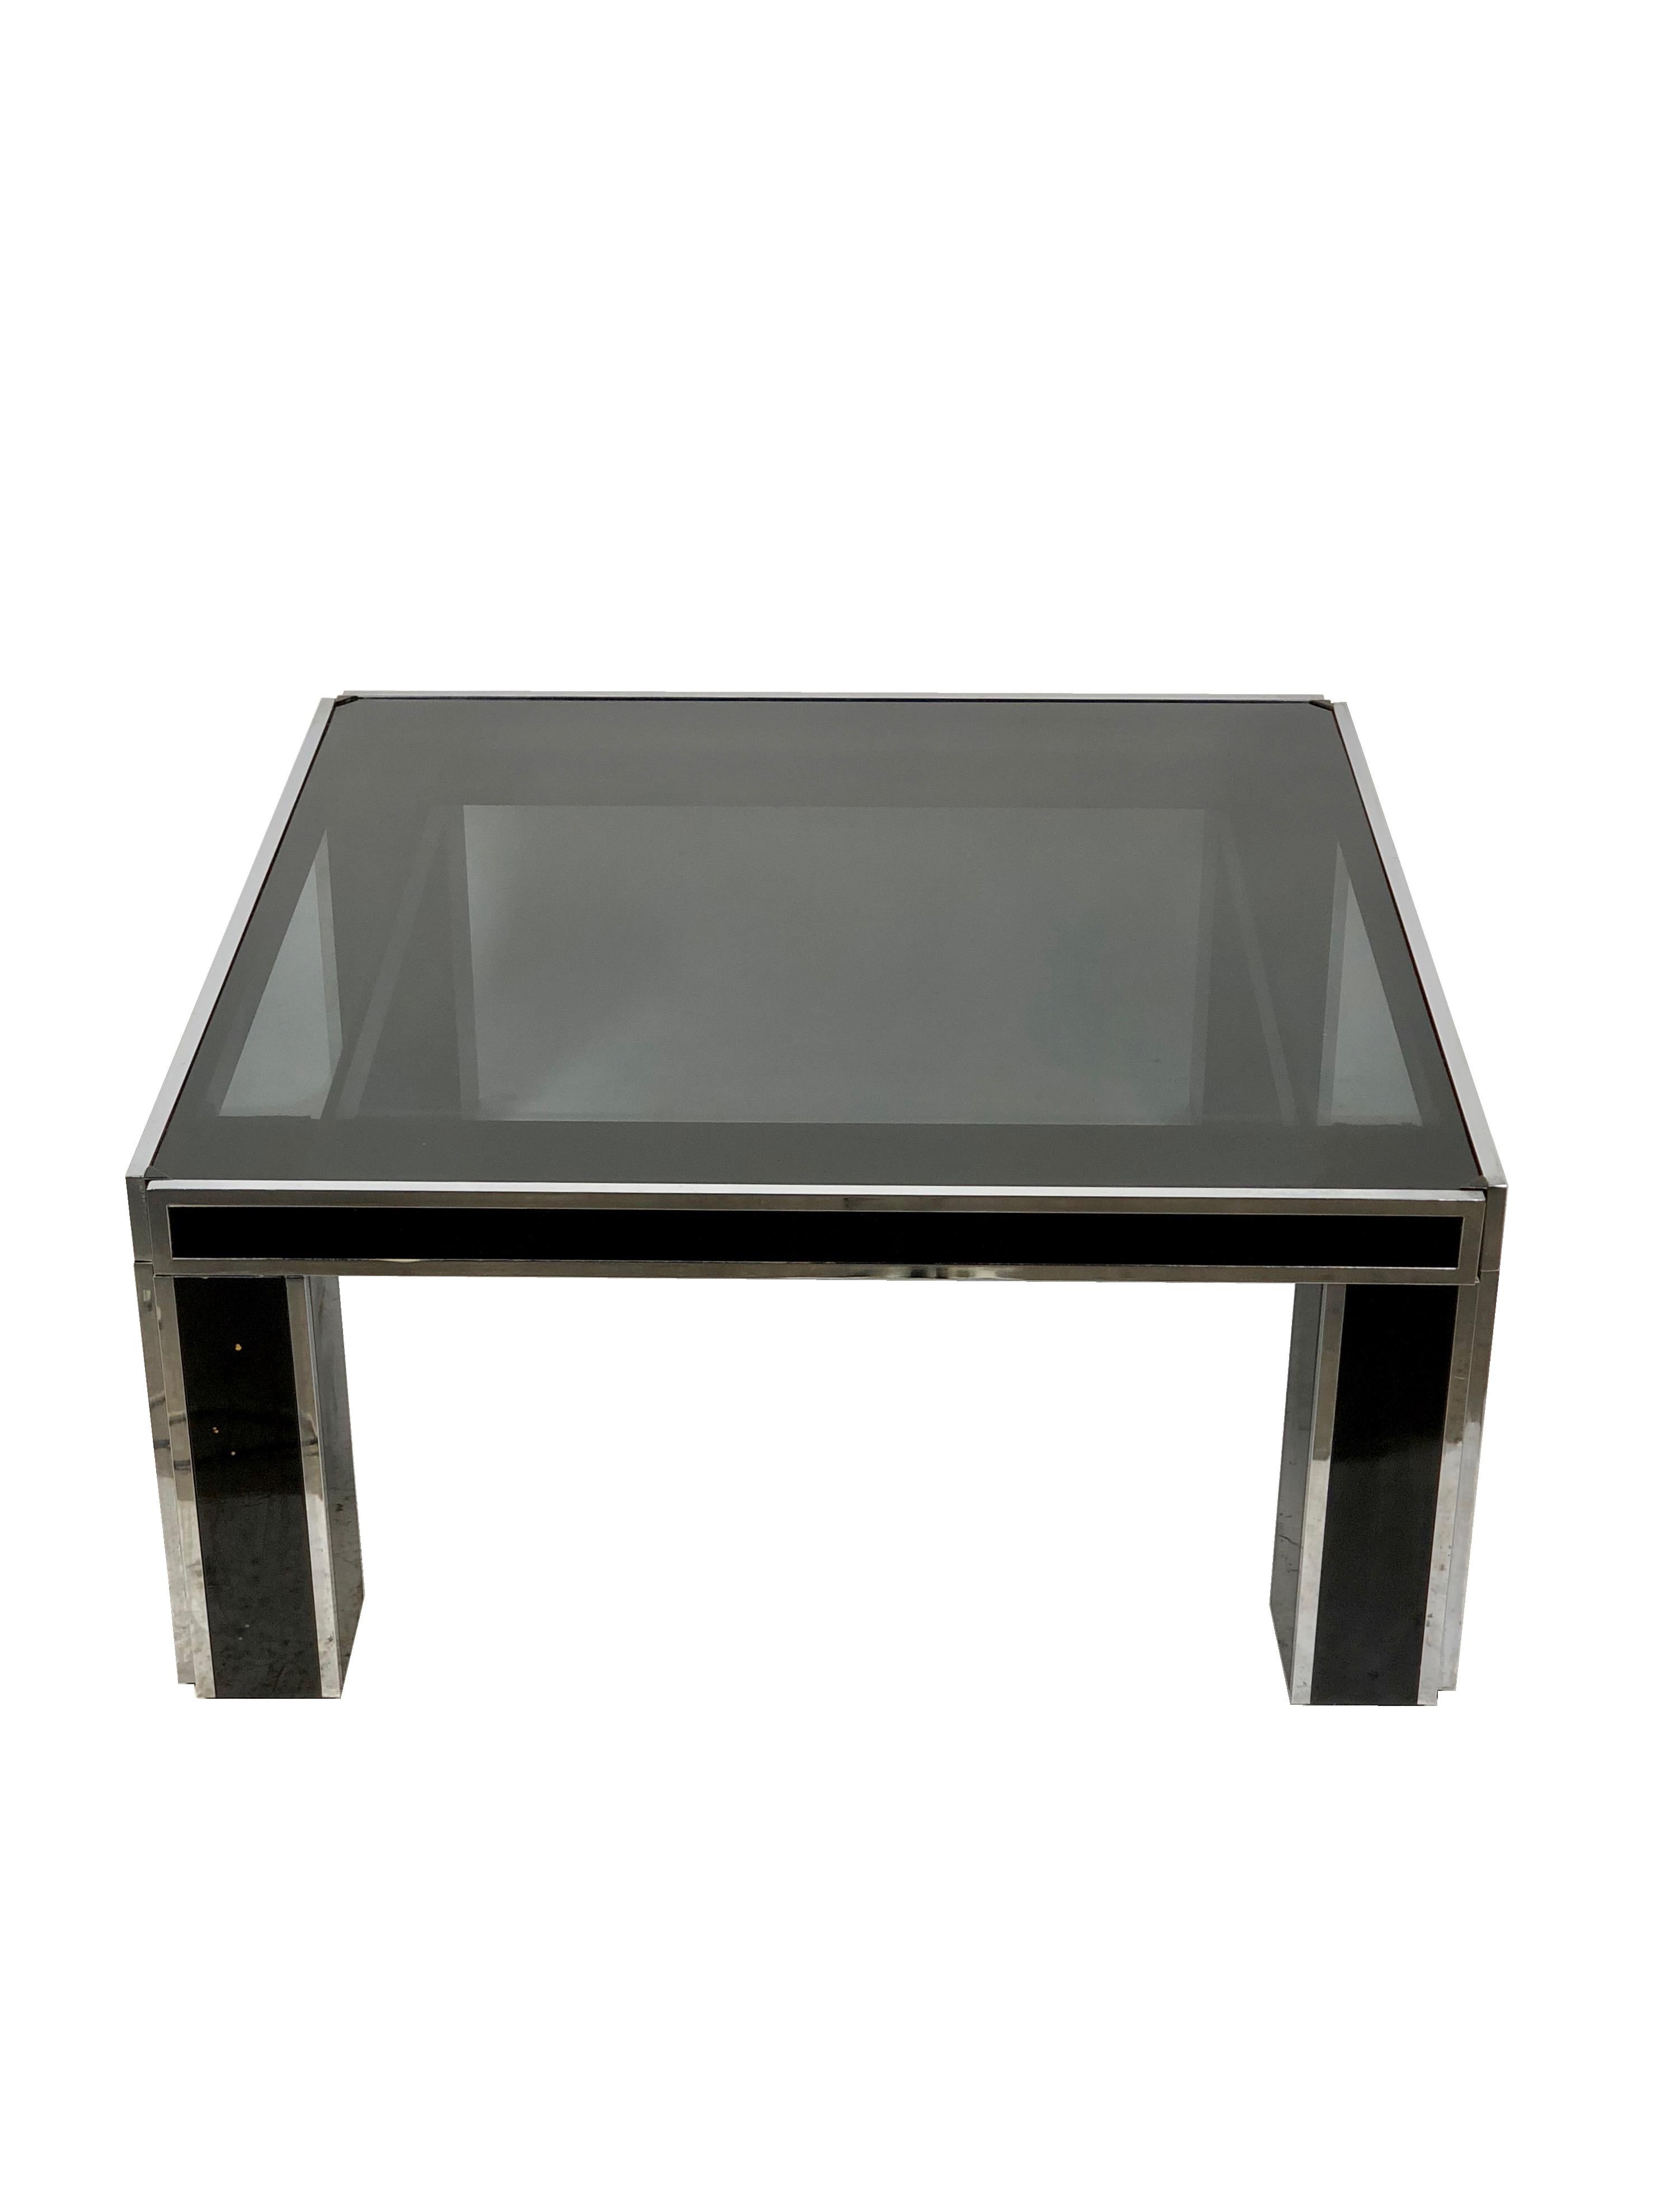 Coffee table in Romeo Rega style made of chrome coated in black and smoked glass, Italy, circa 1970.